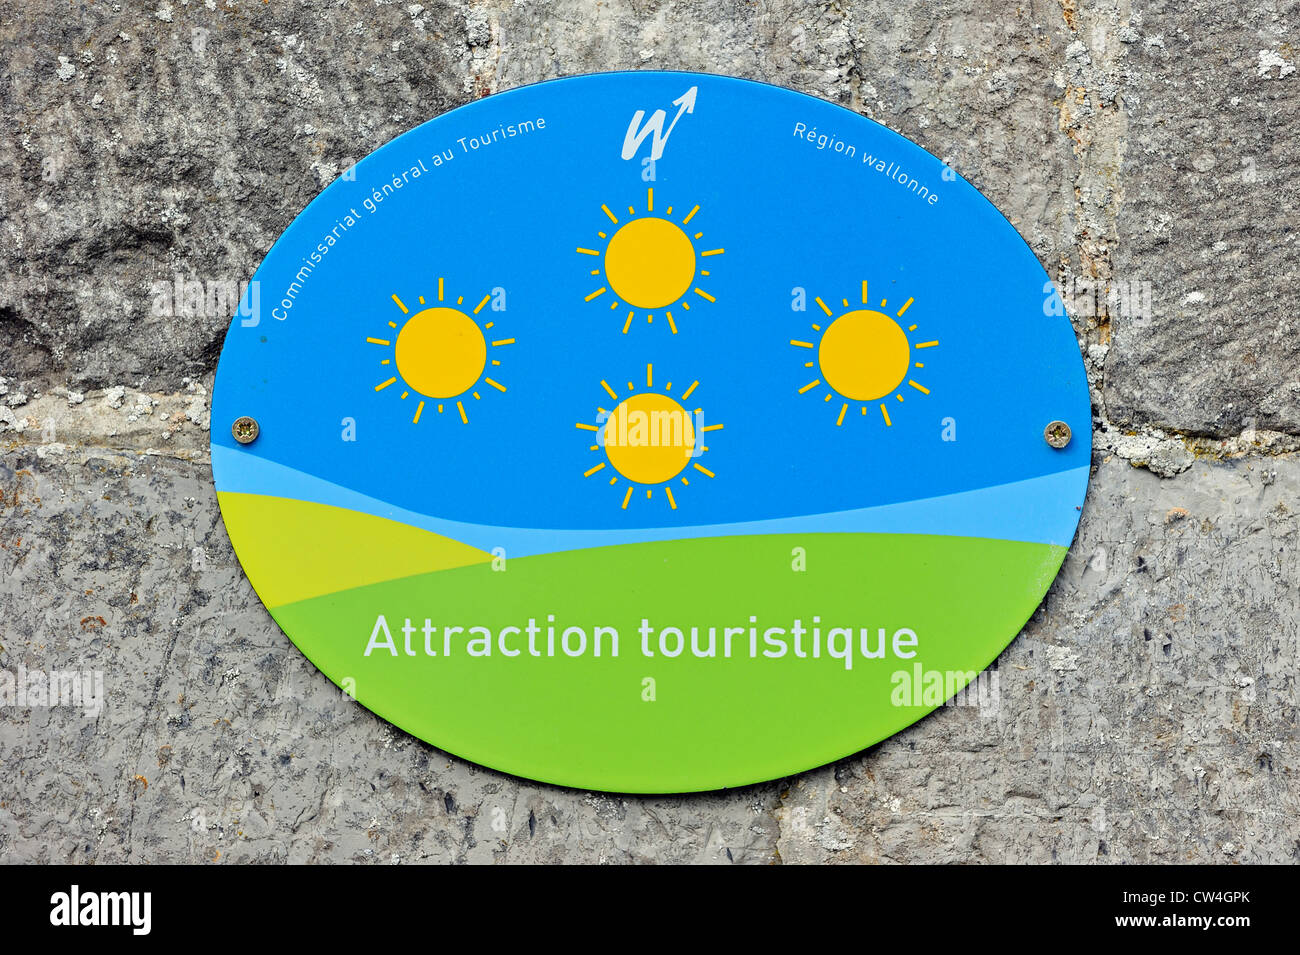 Shield with logo of tourism place of interest / tourist attraction in Wallonia, Belgium Stock Photo